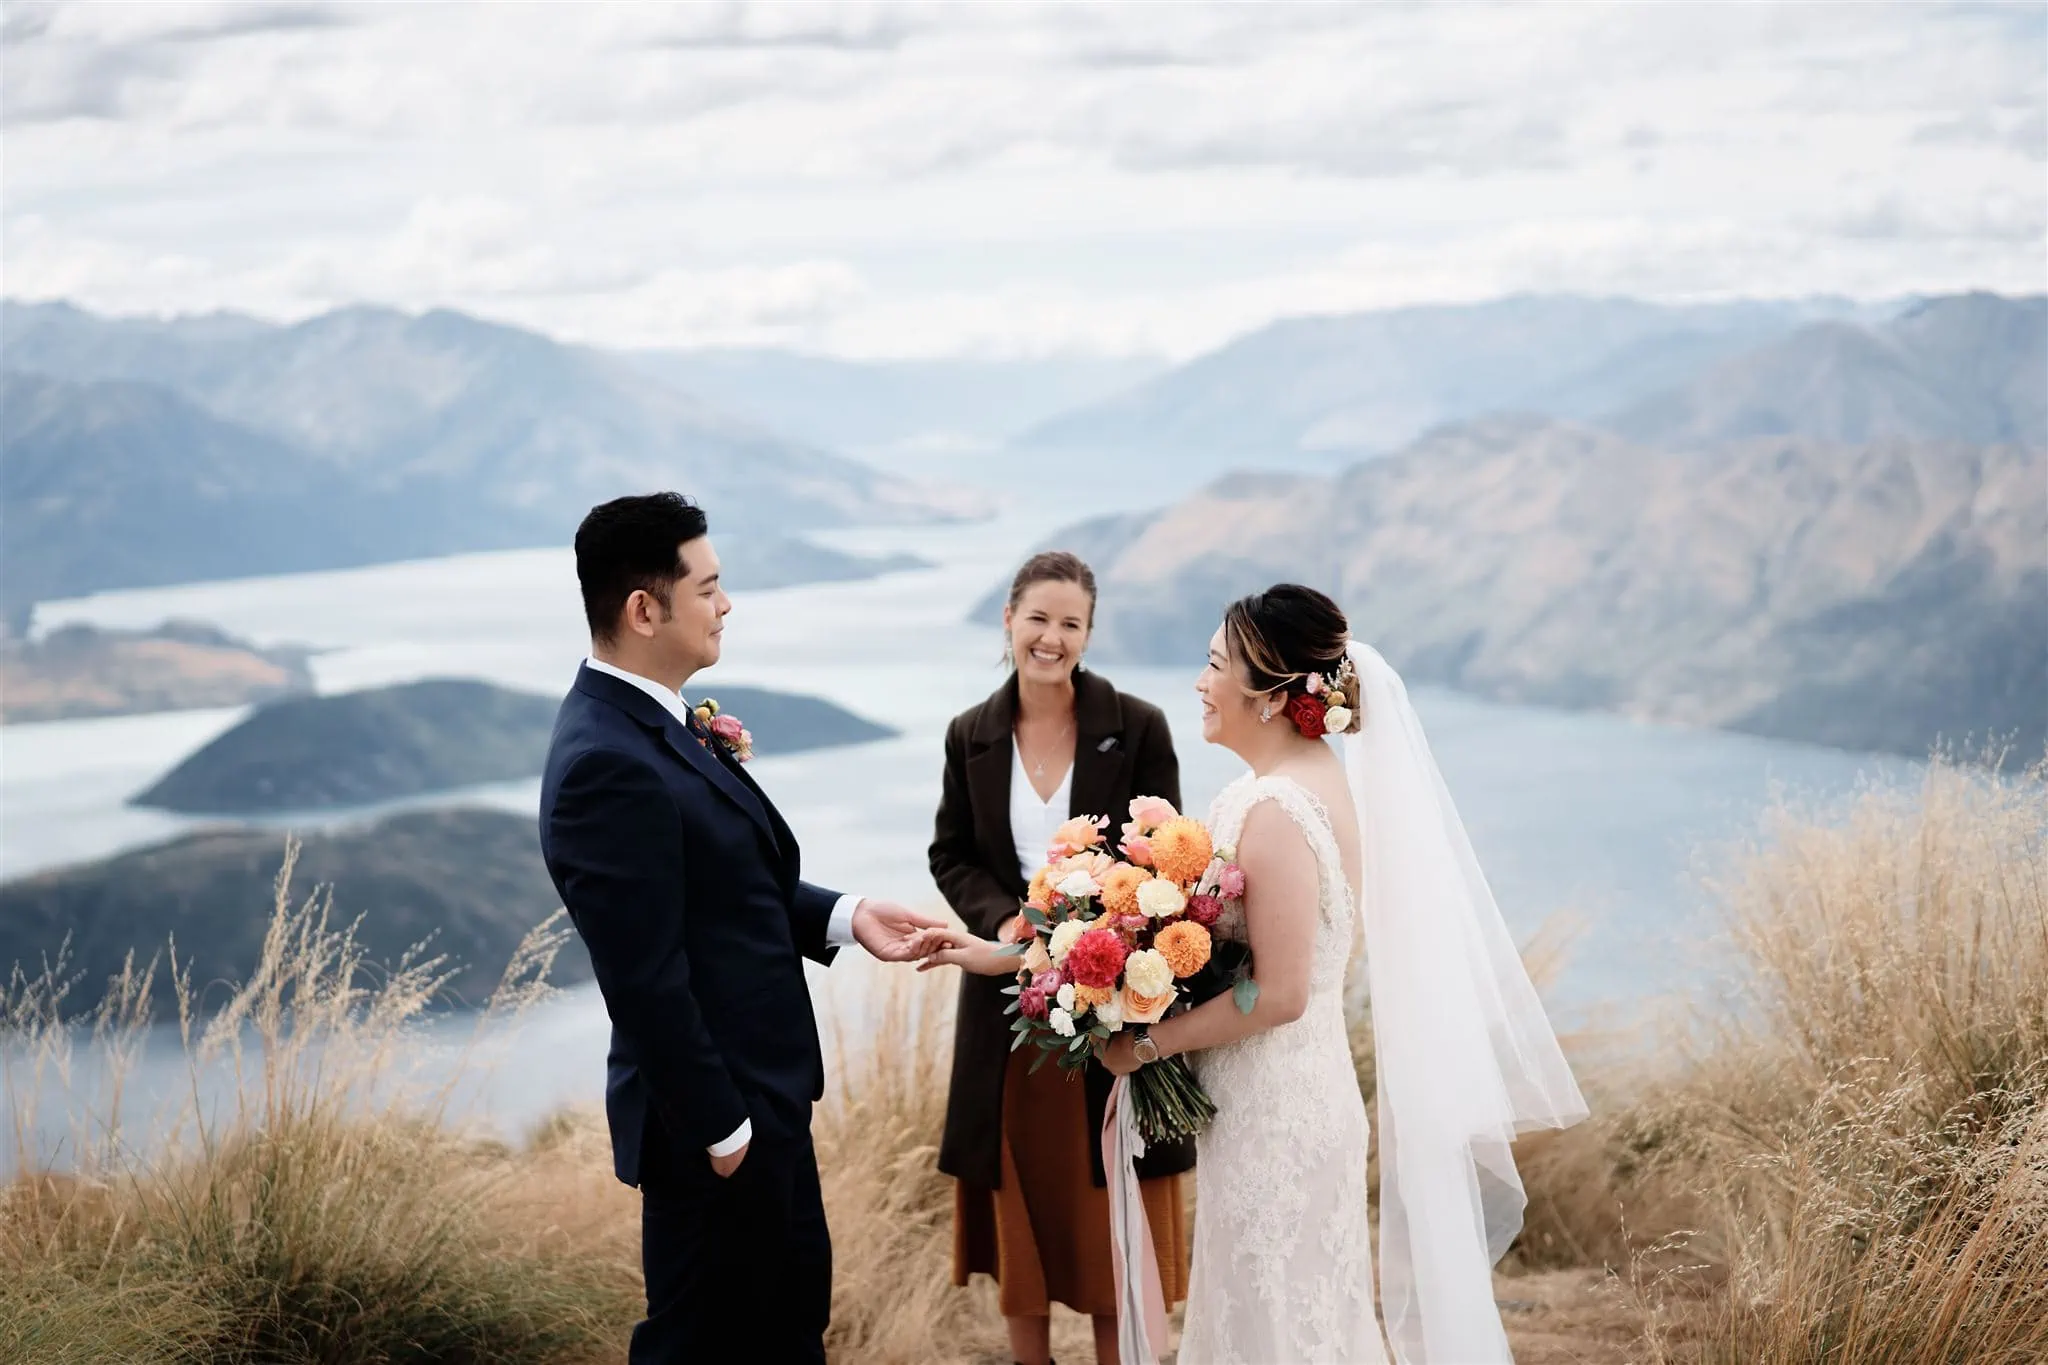 Queenstown New Zealand Elopement Wedding Photographer - The Ultimate Queenstown Elopement Wedding Guide: A bride and groom exchange vows on top of a mountain in New Zealand.